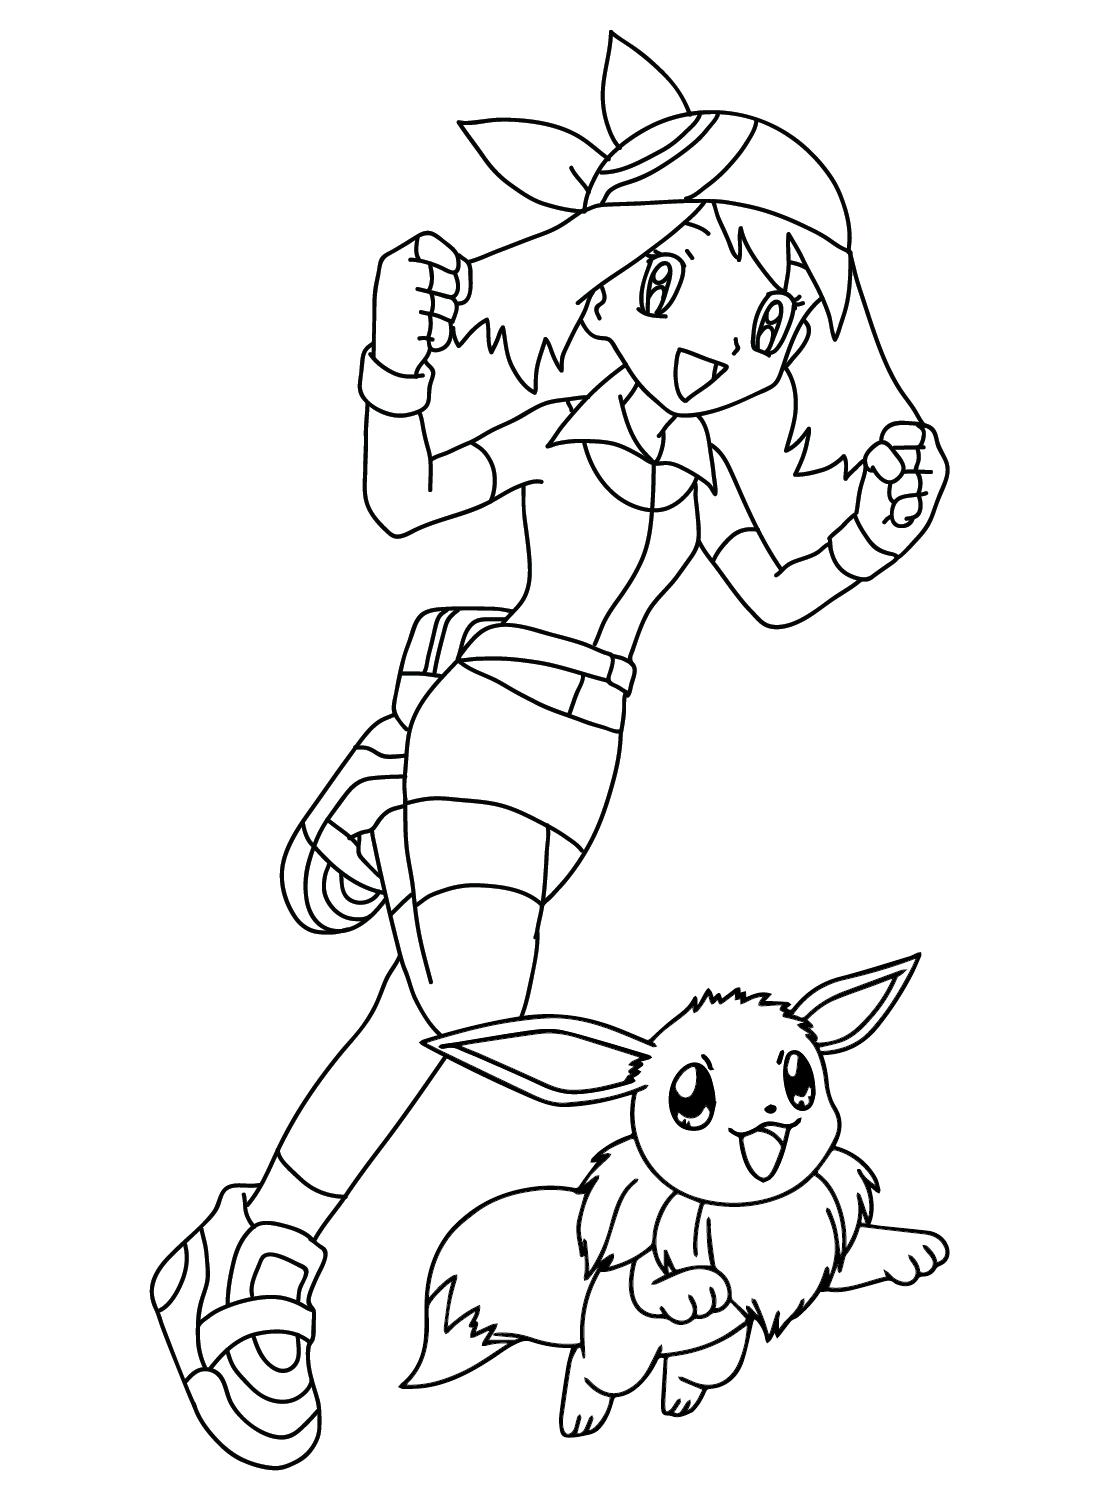 Coloring Page May Pokemon from May Pokemon